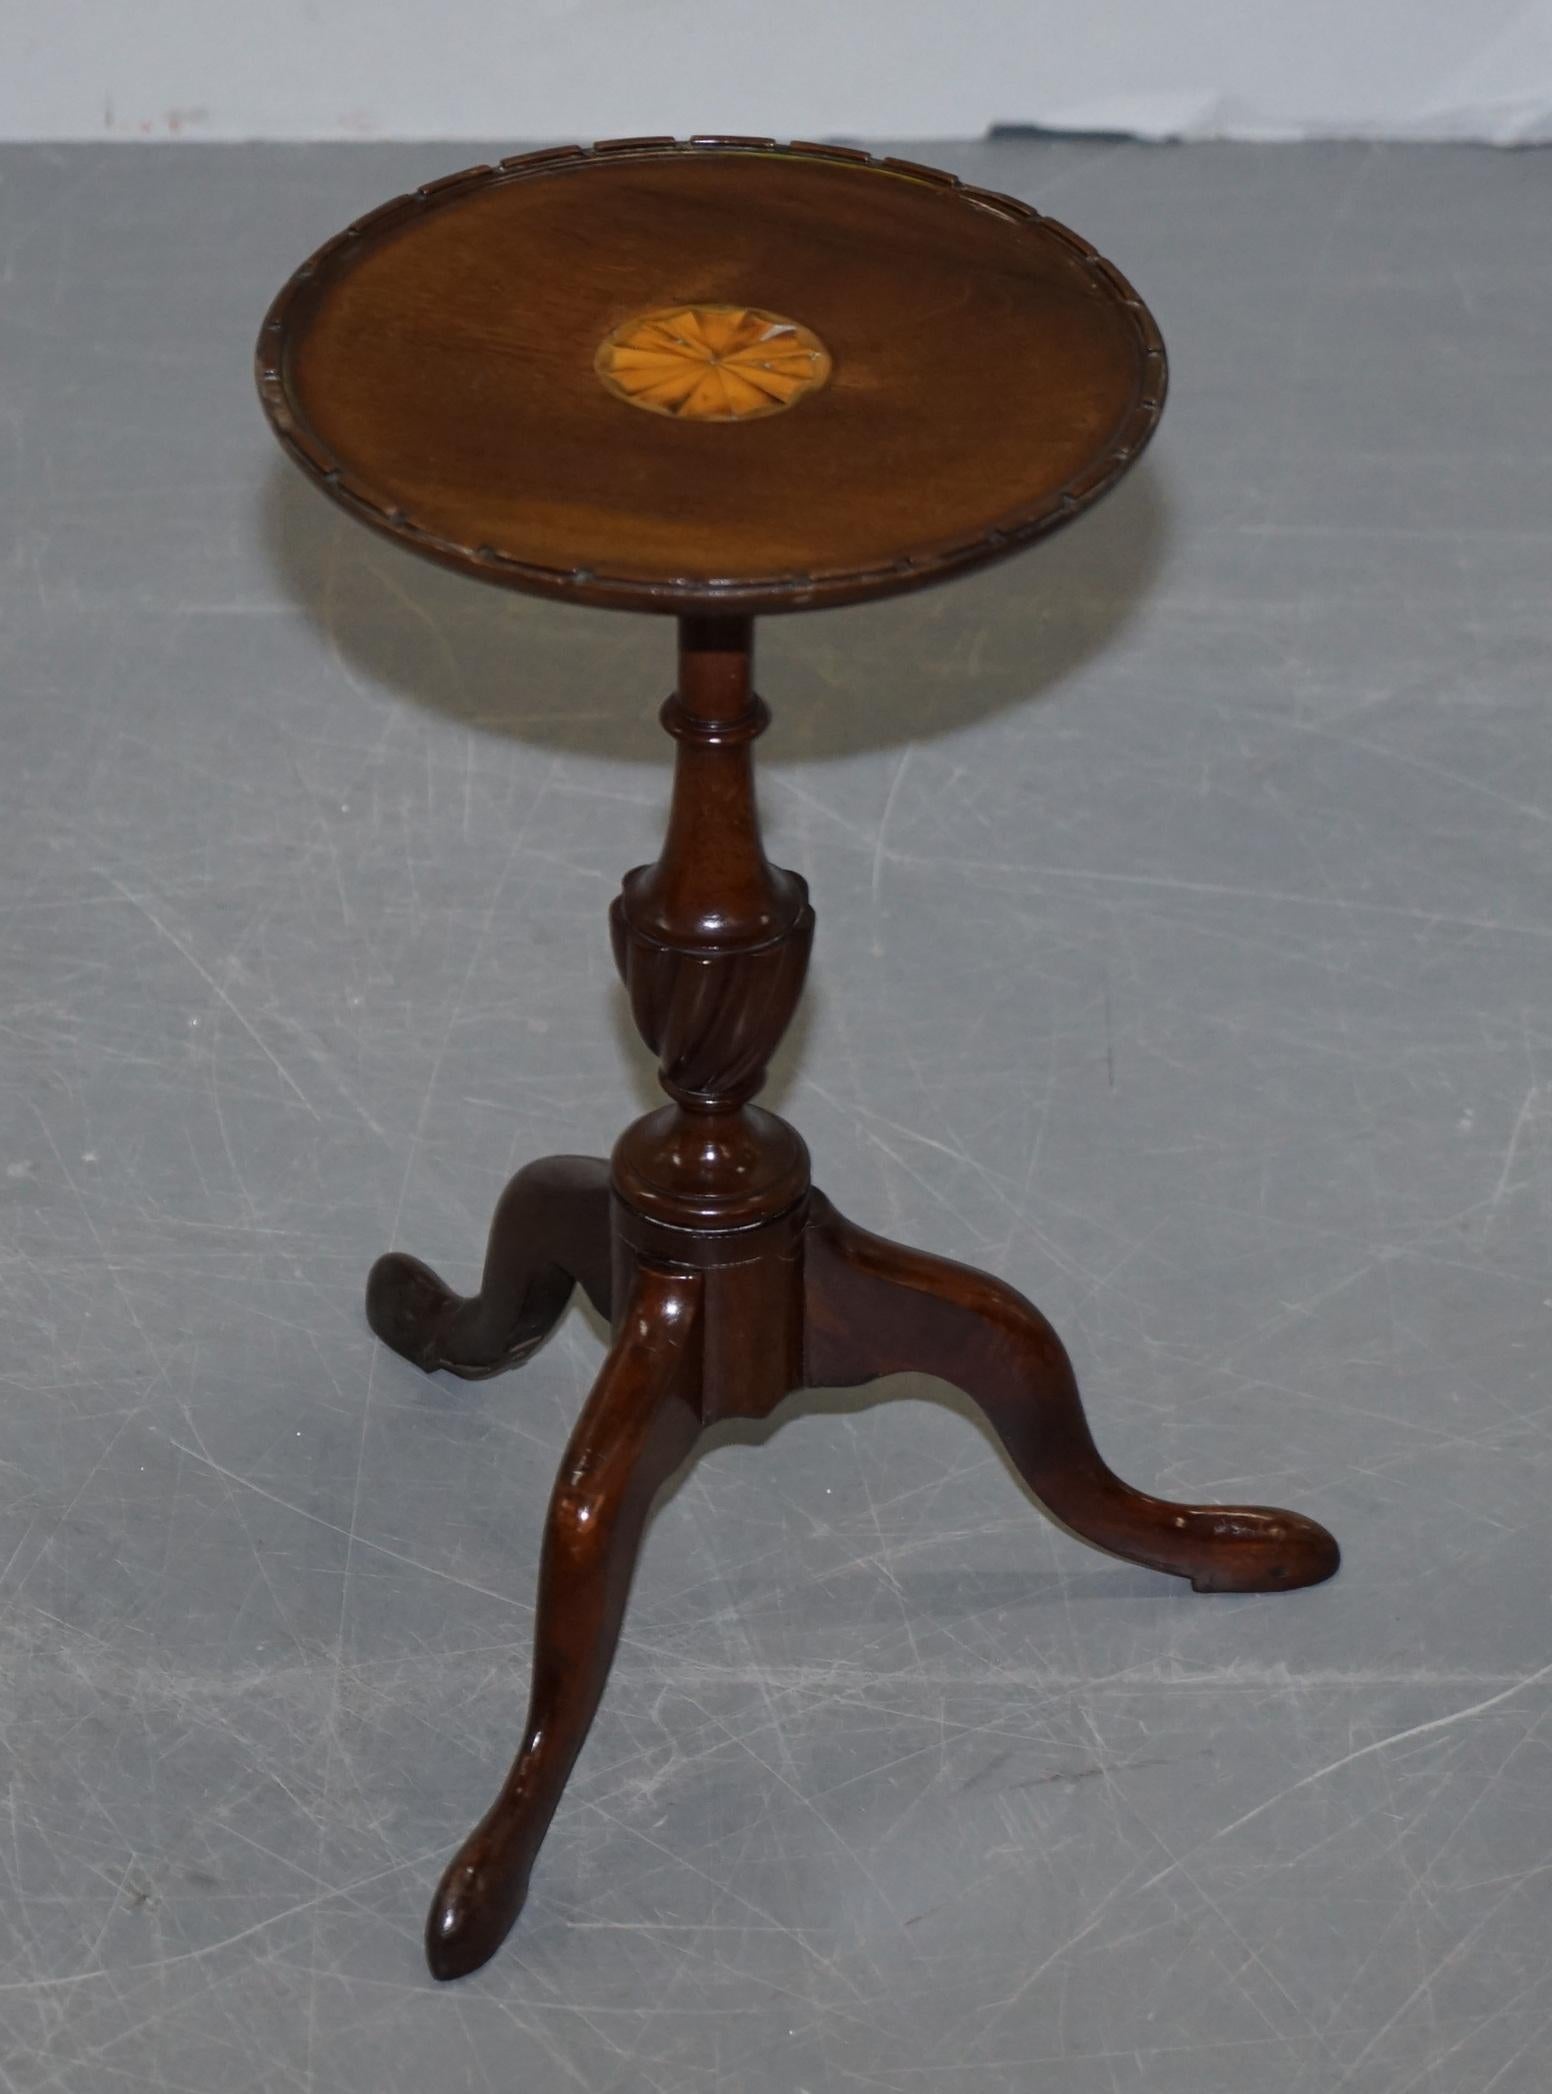 We are delighted to offer for sale this lovely pair of mahogany Sheraton revival lamp or wine tables circa 1880-1900

A very good looking and well made pair, they are mahogany with decorative Sheraton revival style inlay to the top which is